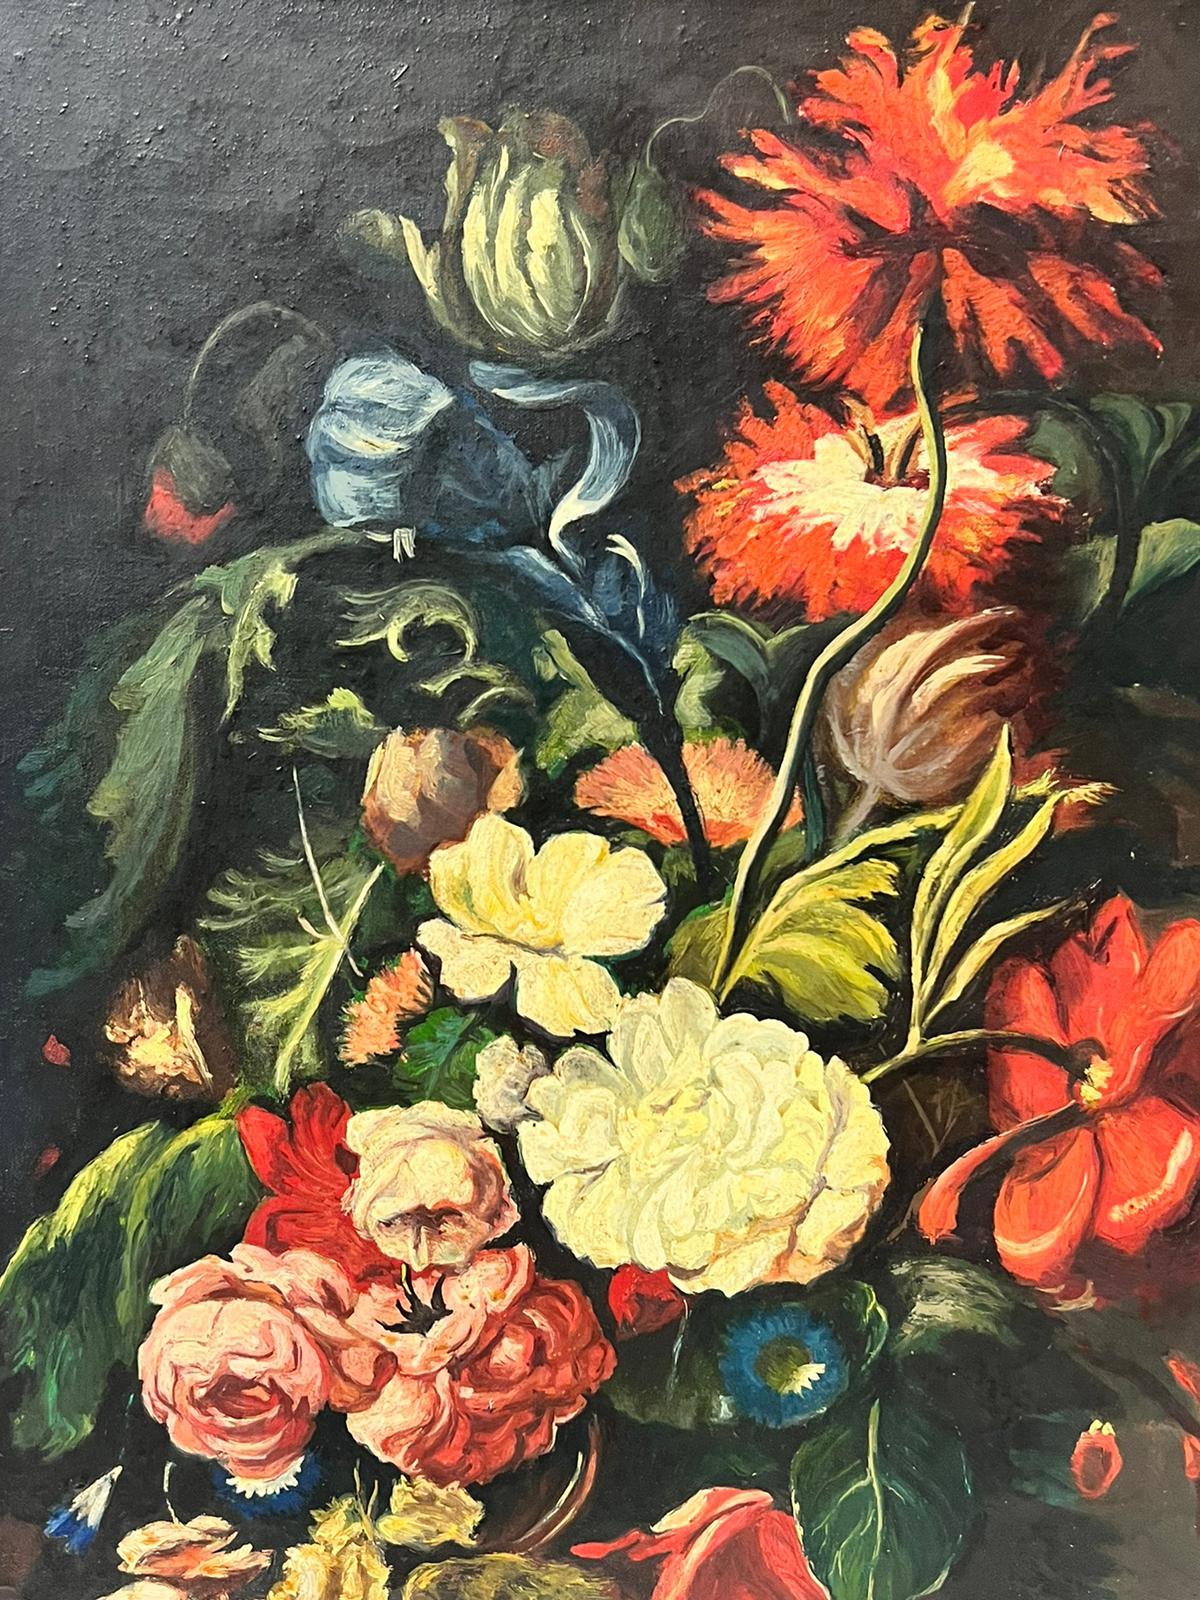 Classical Still Life Ornate Flowers in Vase in the Traditional Old Master style - Old Masters Painting by French School